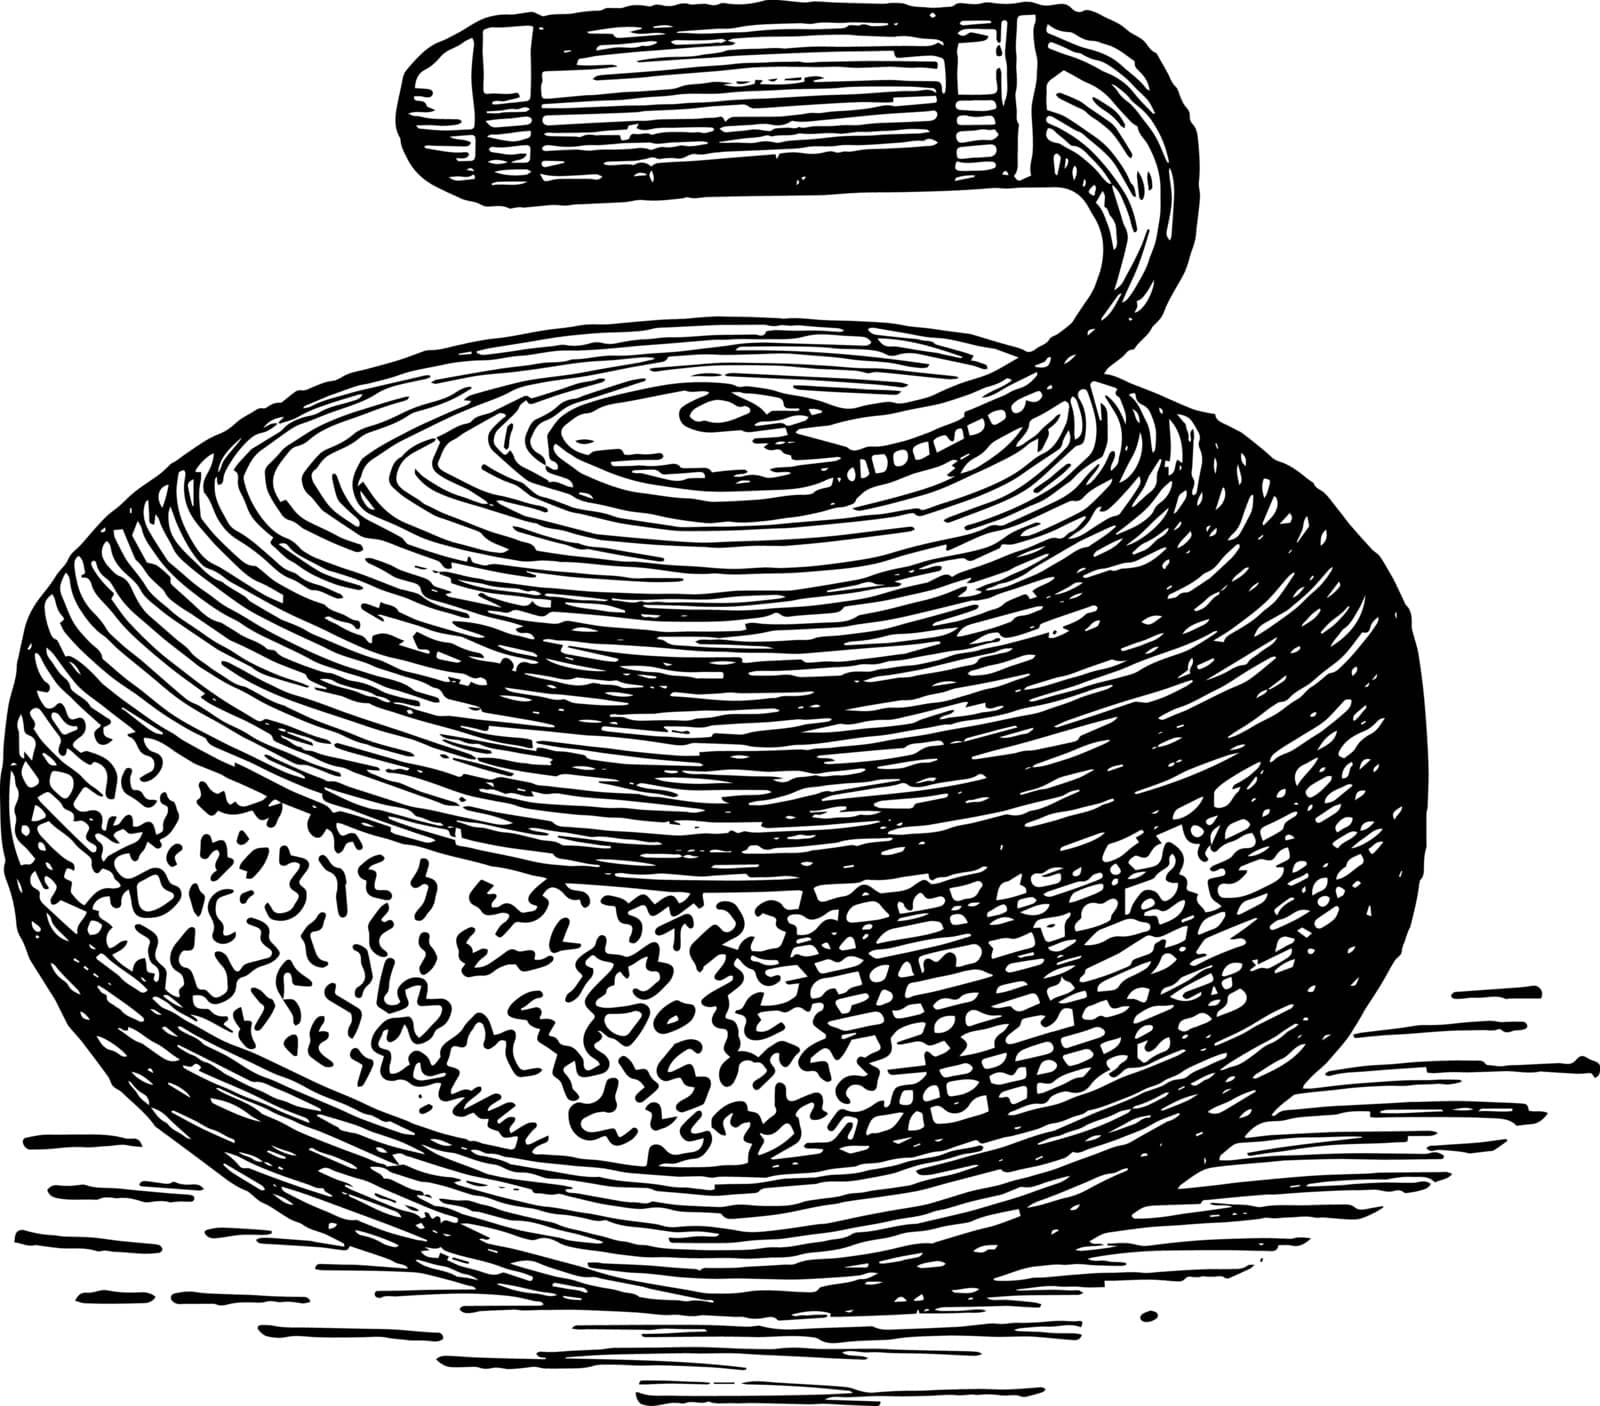 The curling stone of the sport of curling vintage line drawing or engraving illustration.